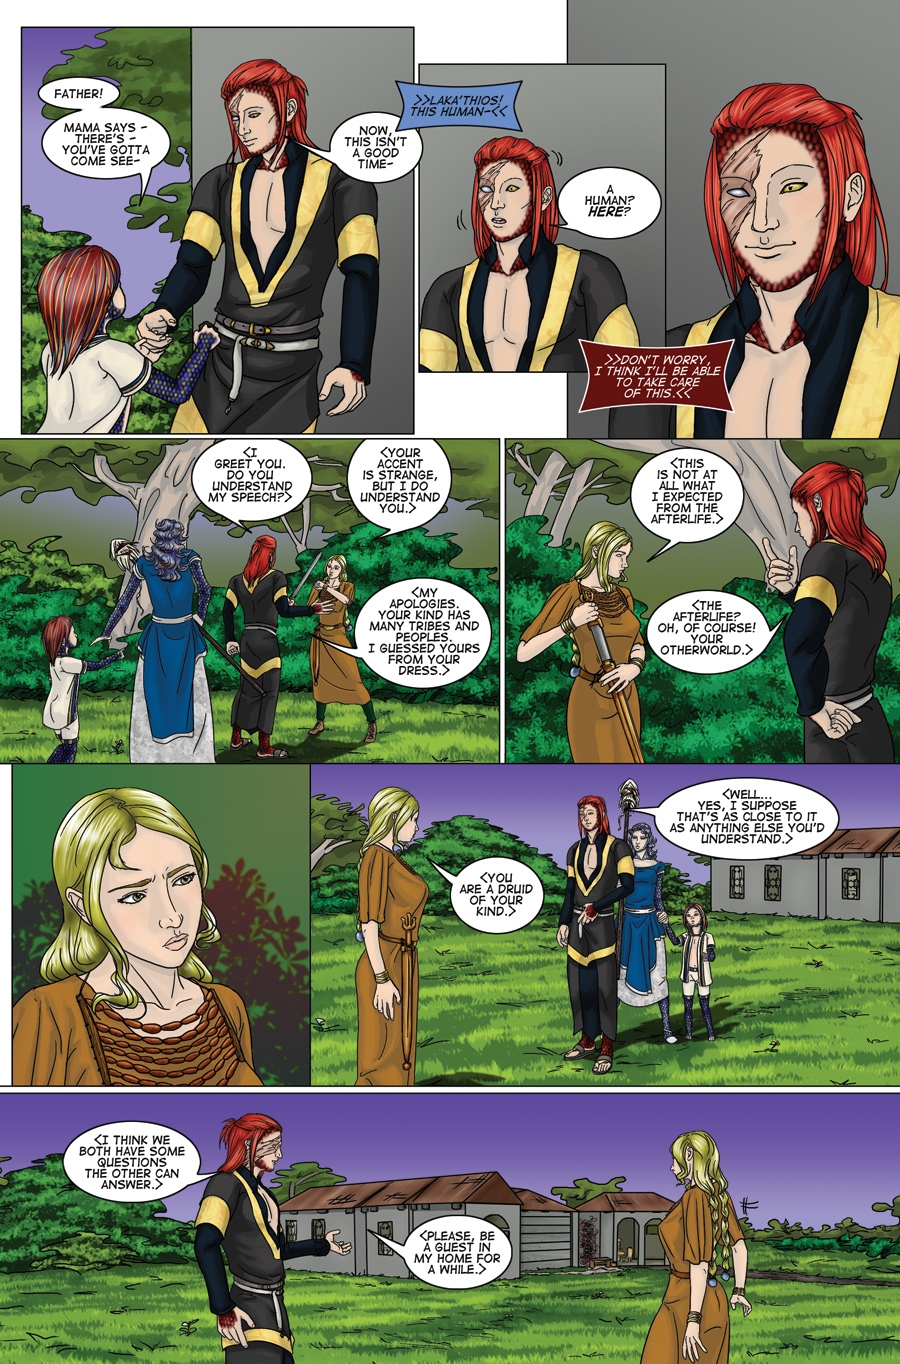 Chapter 2, Page 11